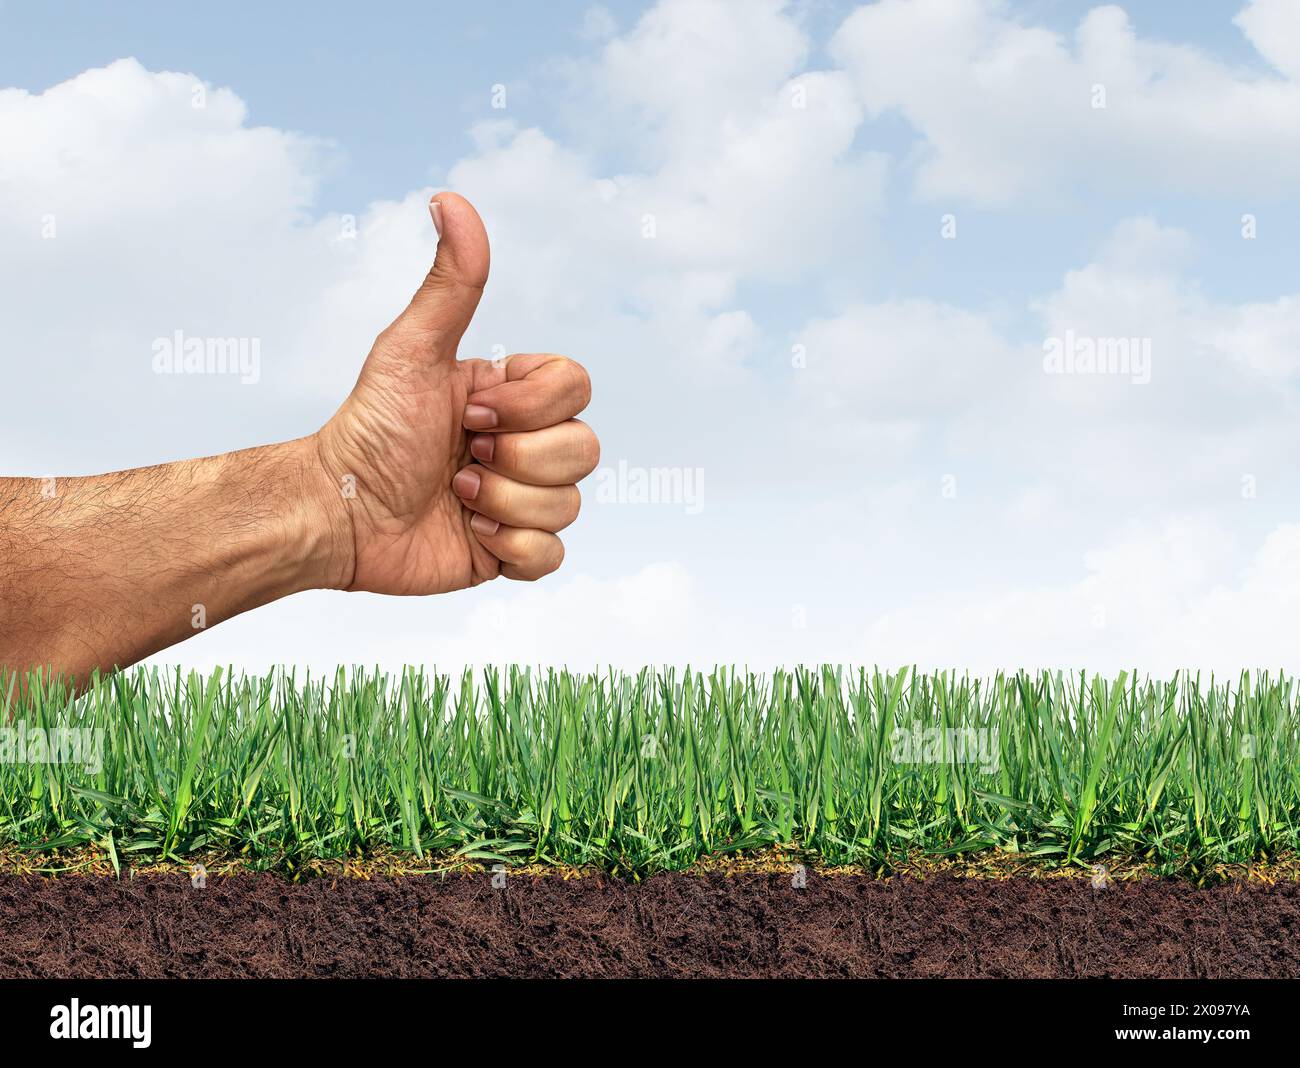 Perfect Lawn and healthy grass as lawncare symbol for controlling weeds and fertilizing and aerating turf as a landscaper giving approval for good gar Stock Photo